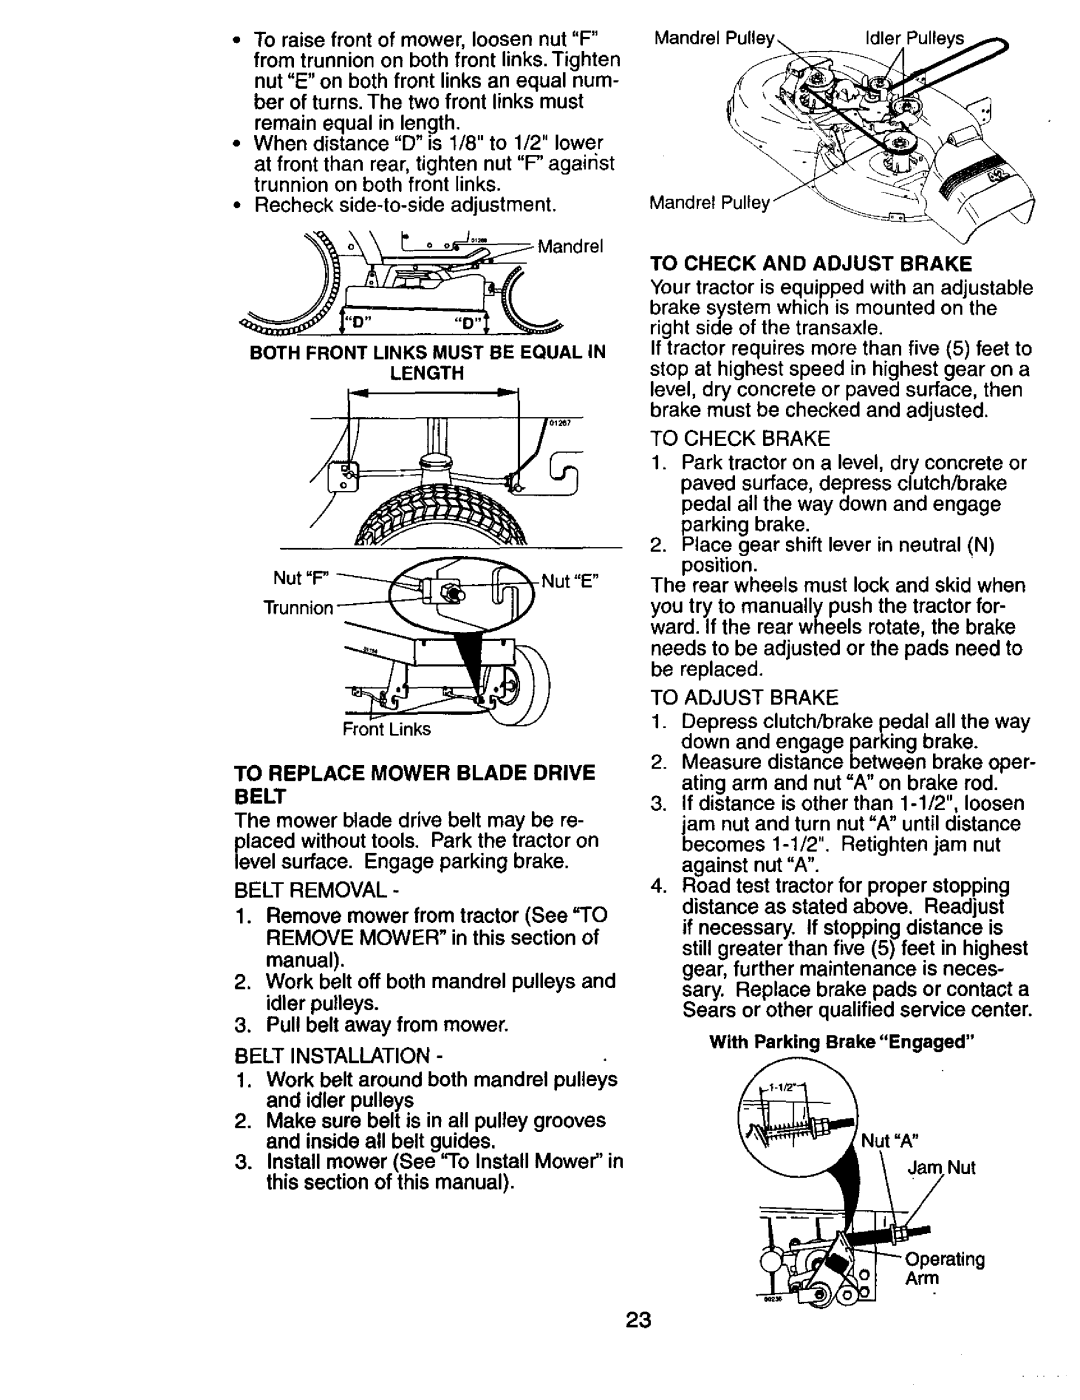 Craftsman 917.274031 owner manual To Replace Mower Blade Drive Belt, Belt Removal, To Check and Adjust Brake, ?Nut 